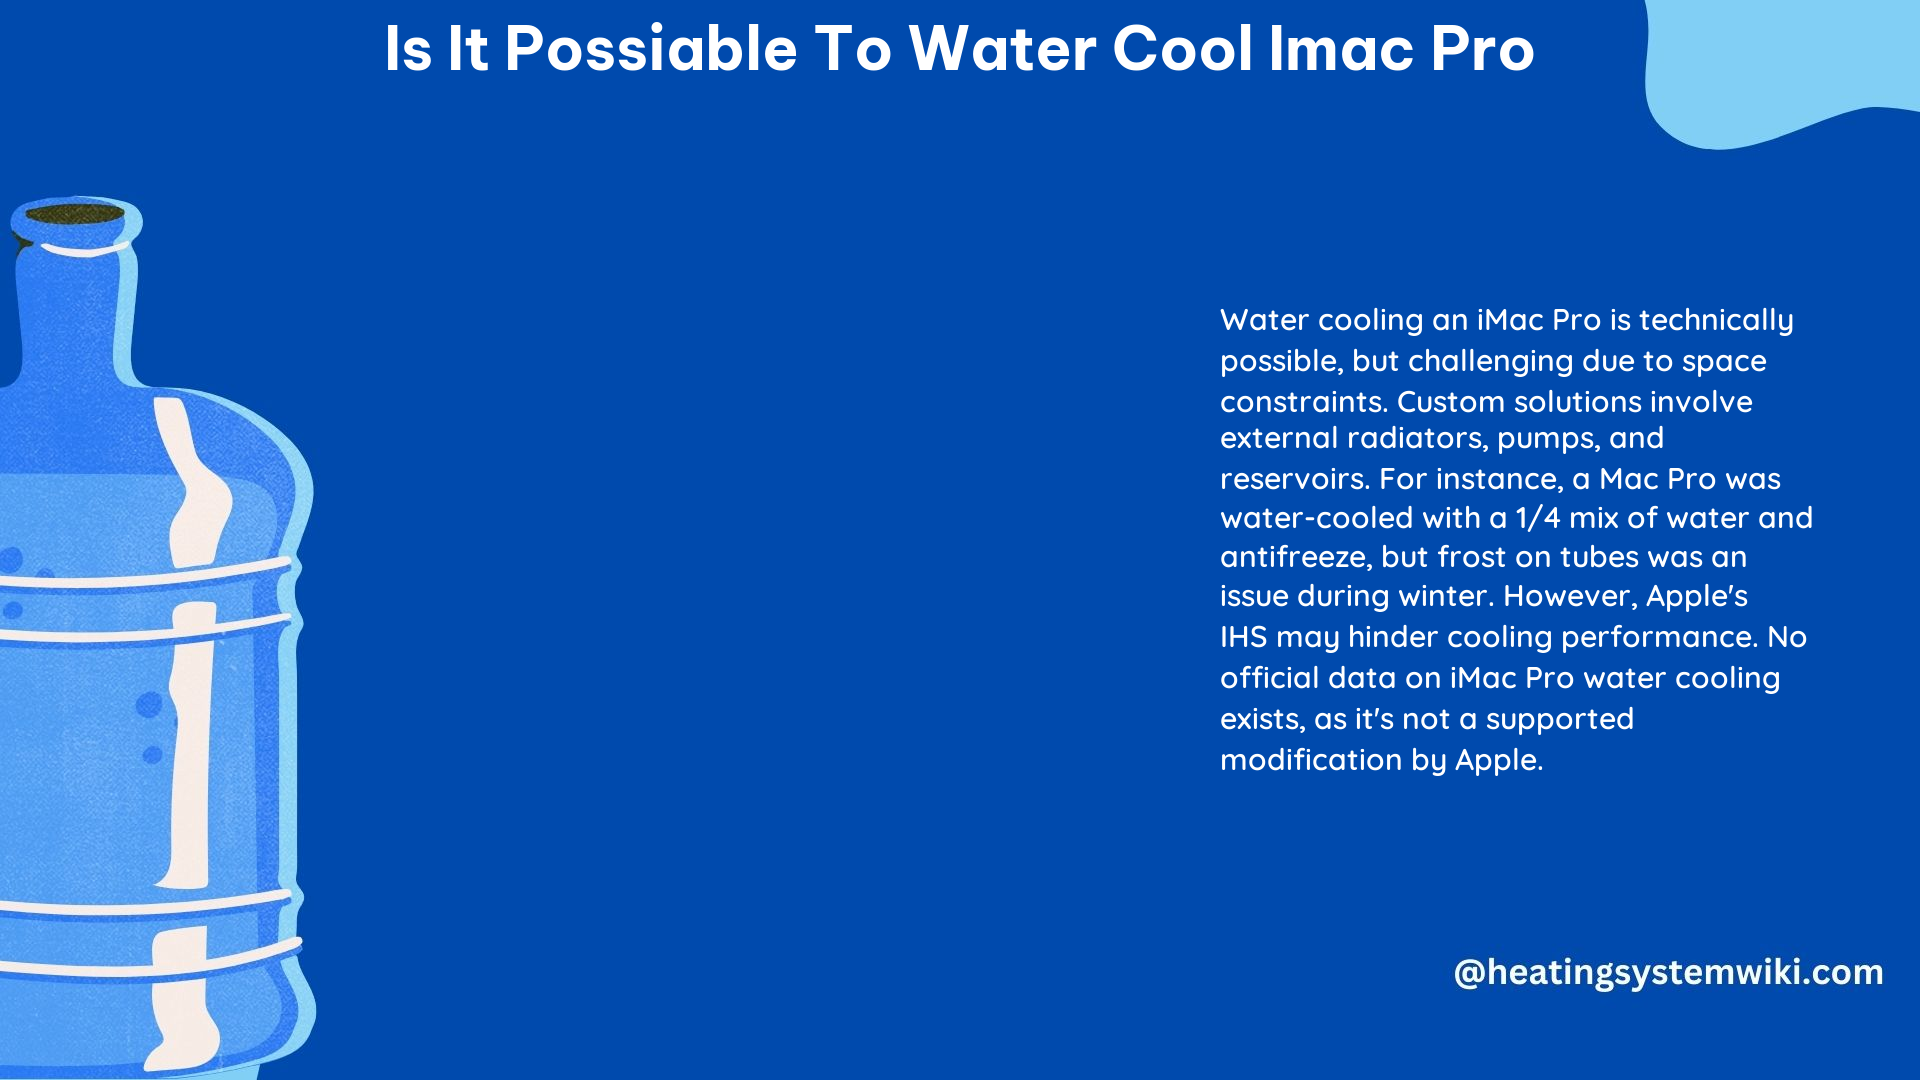 Is It Possiable to Water Cool Imac Pro